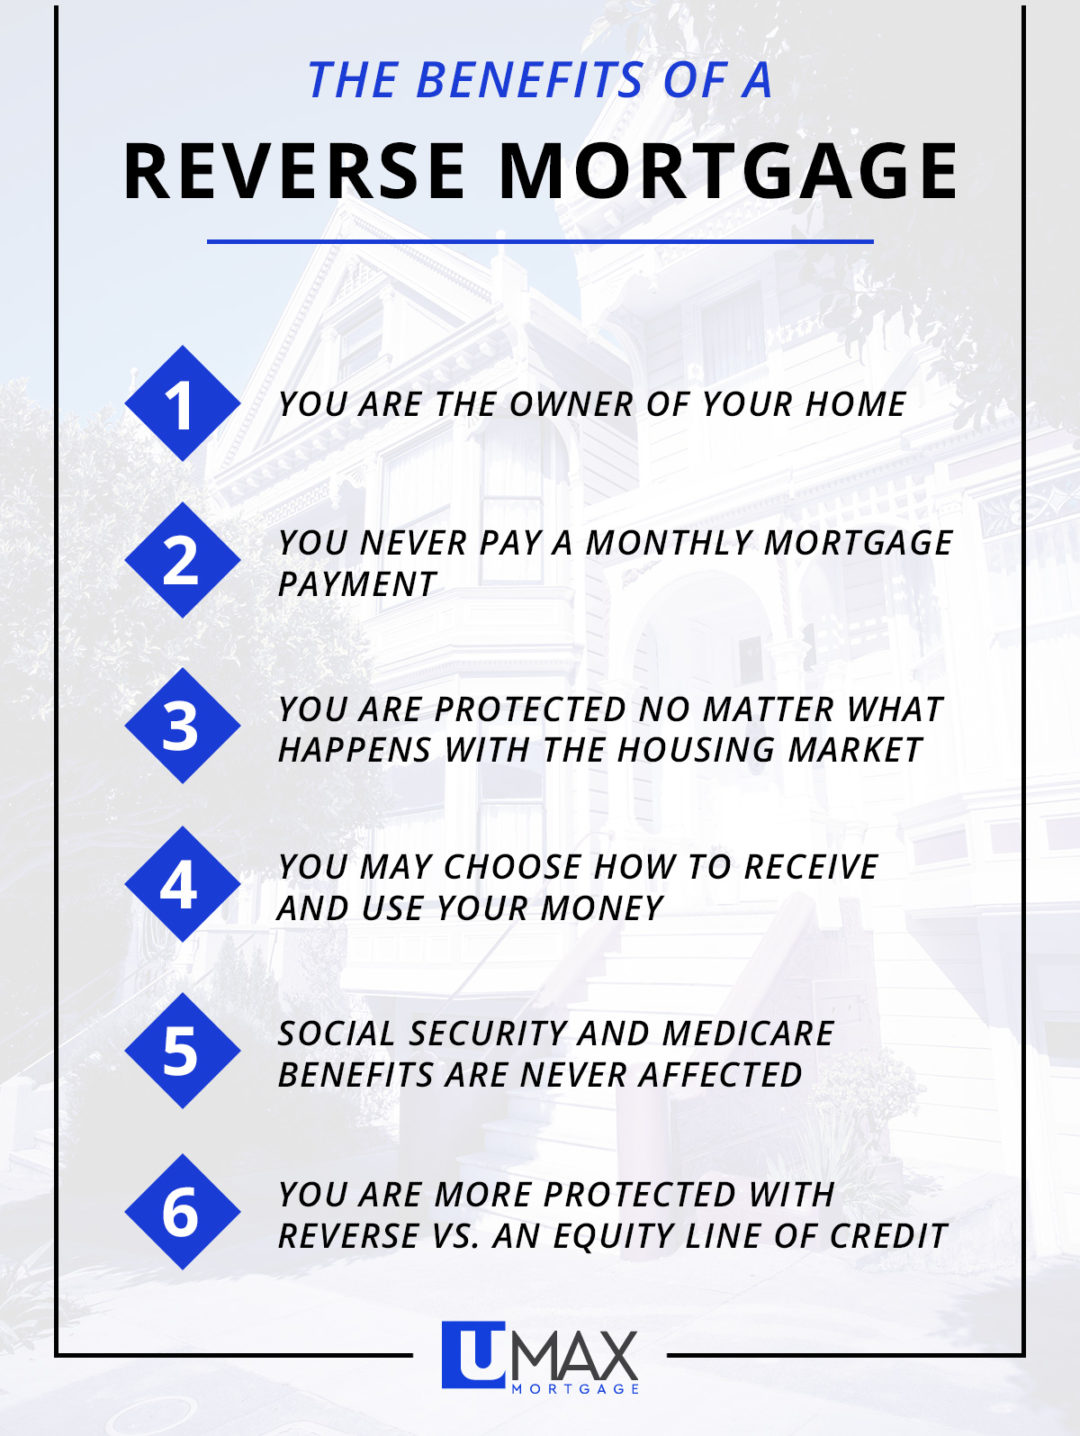 Reverse Mortgage Solutions Learn The Benefits Of Reverse Mortgages In